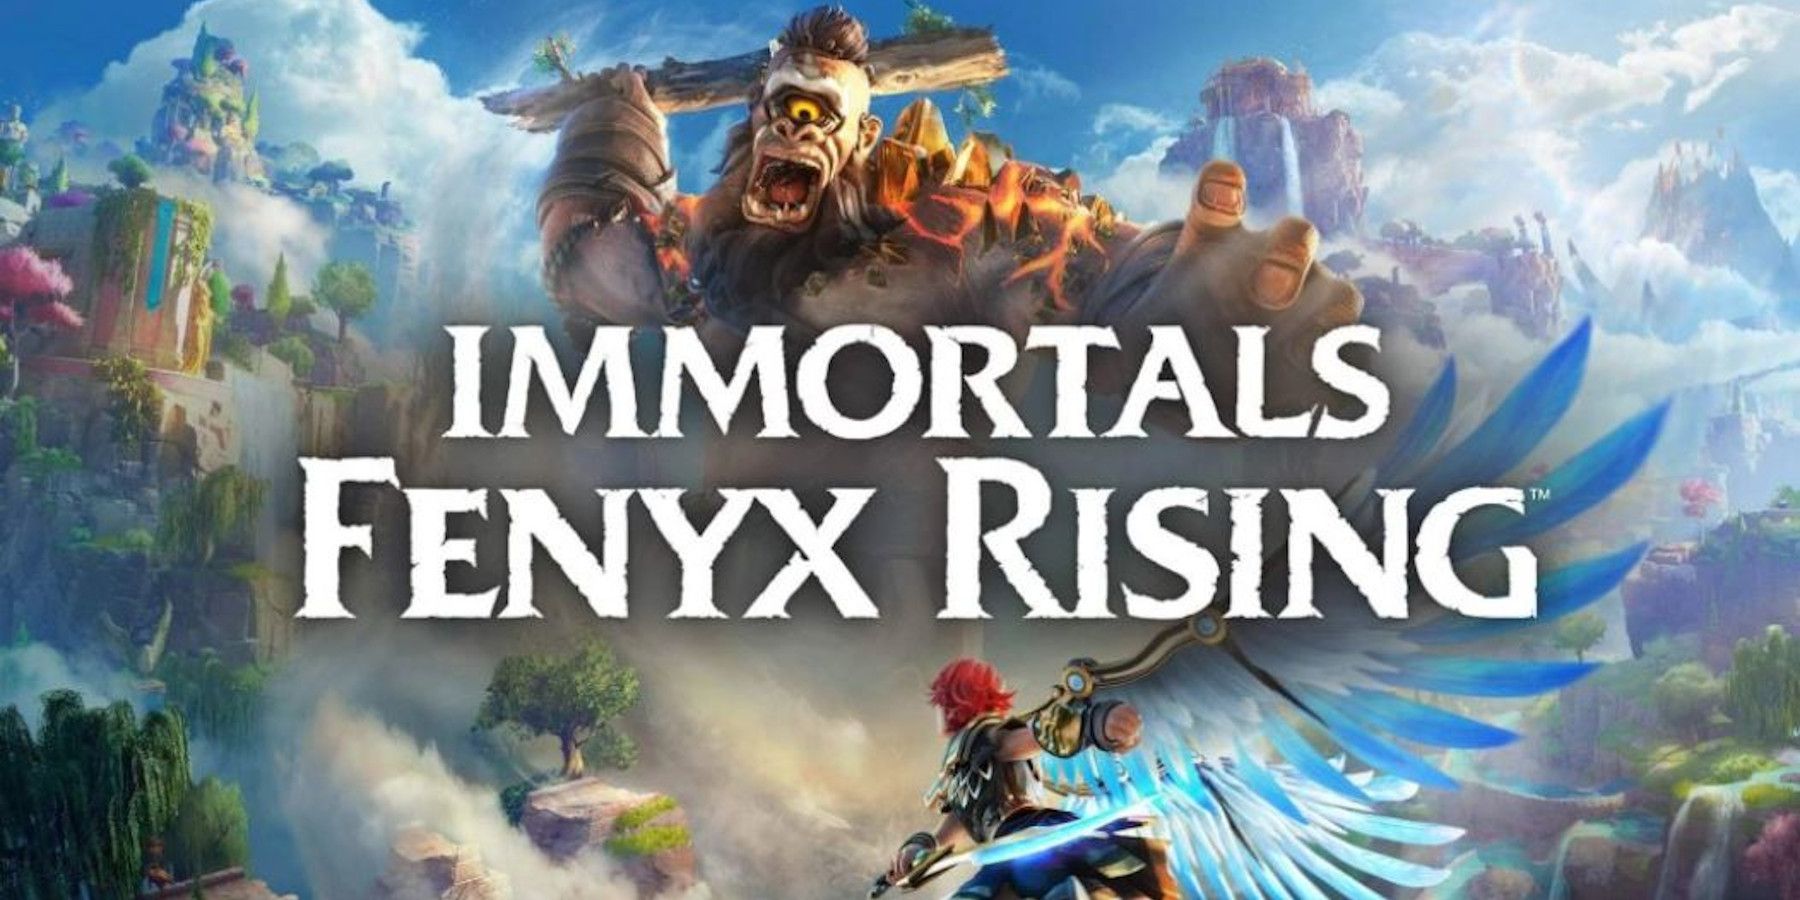 Immortals Fenyx Rising It Aint Much But It's Honest Work quest guide Cyclops